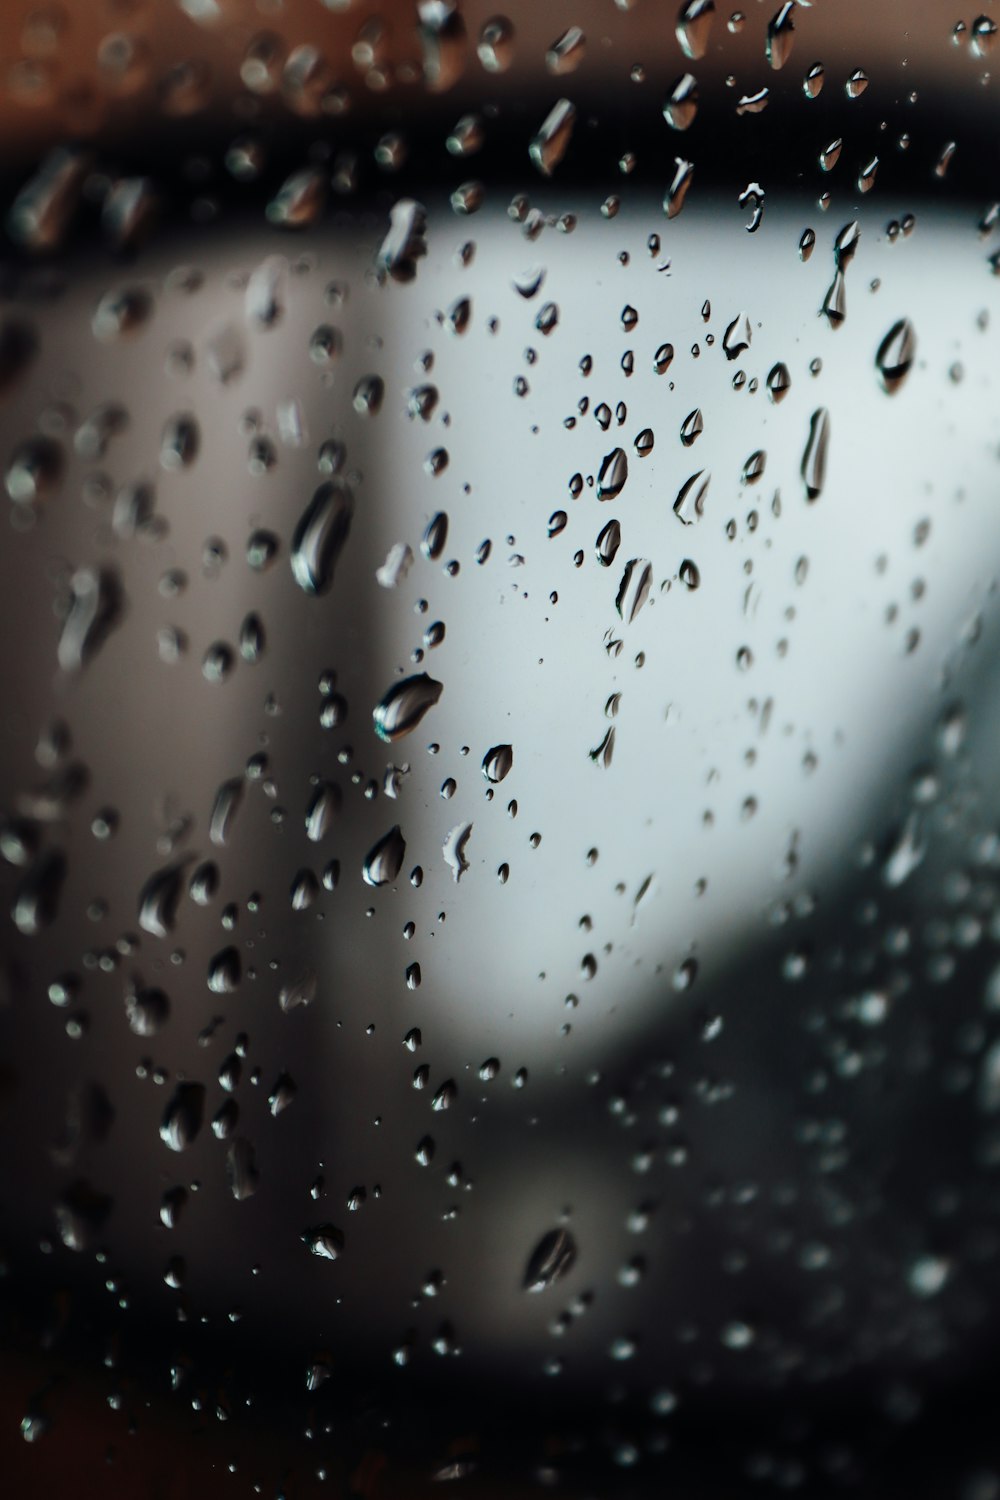 100+ Tears Pictures | Download Free Images on Unsplash